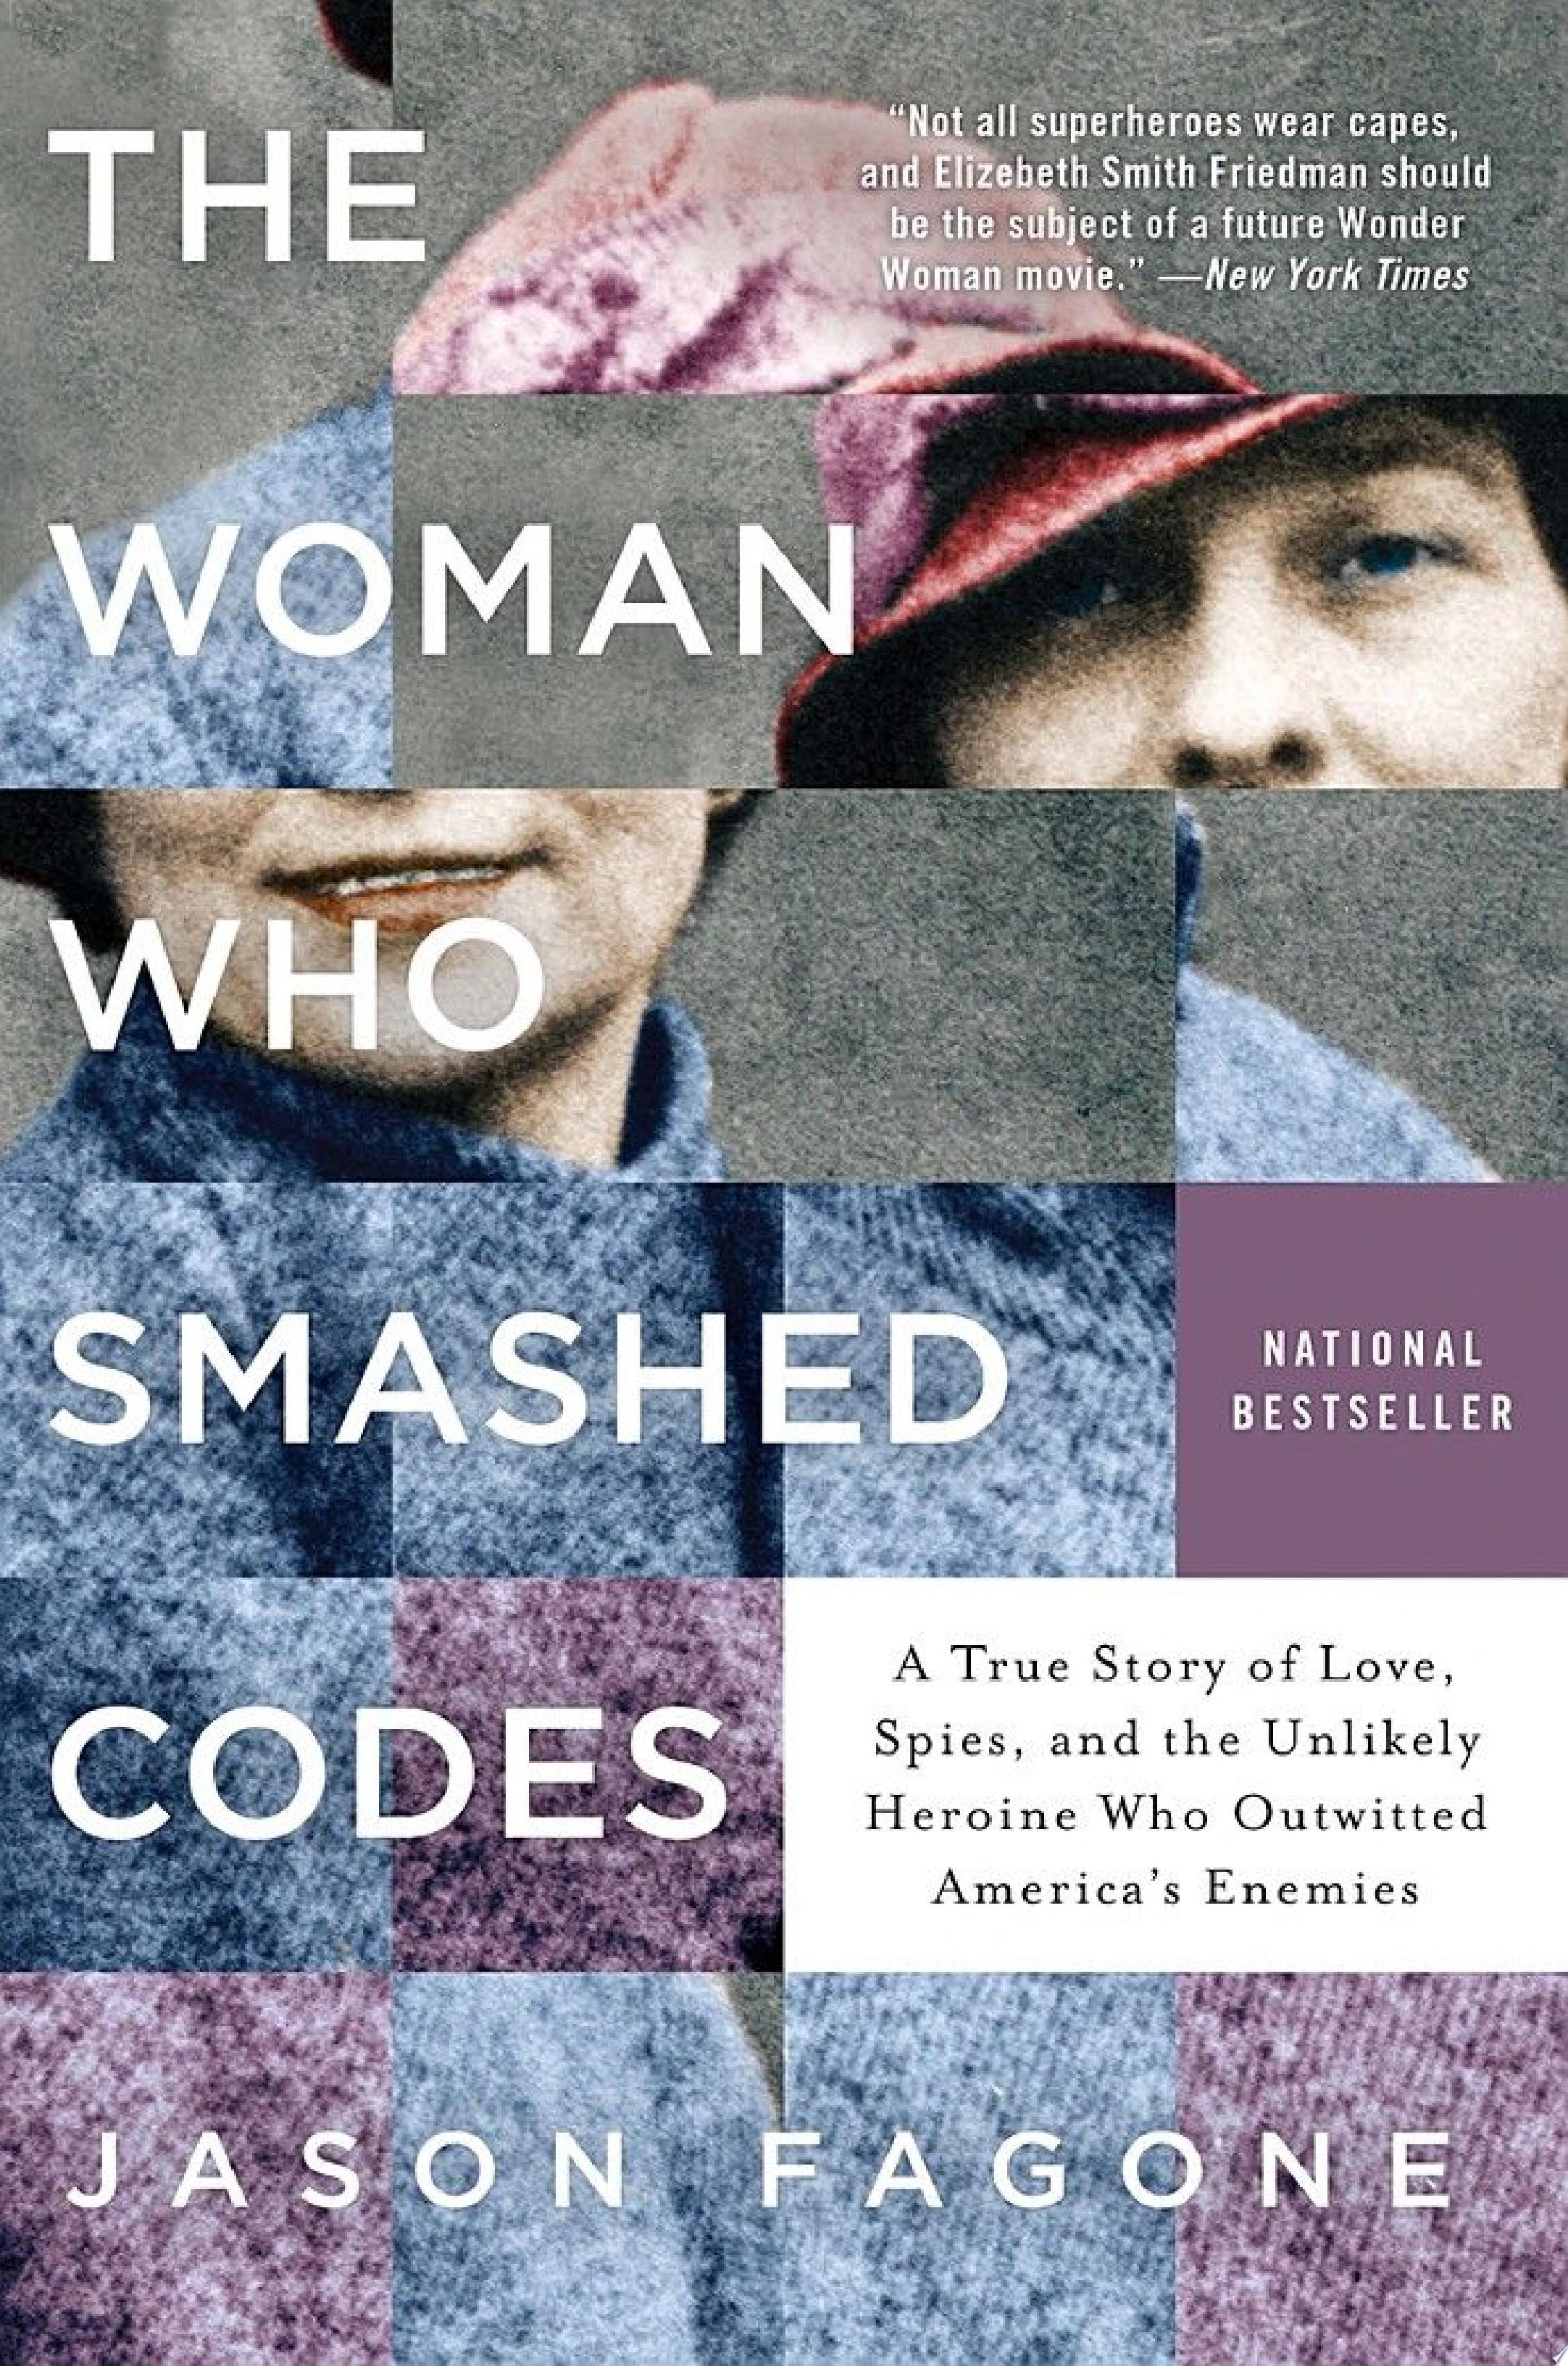 Image for "The Woman Who Smashed Codes"